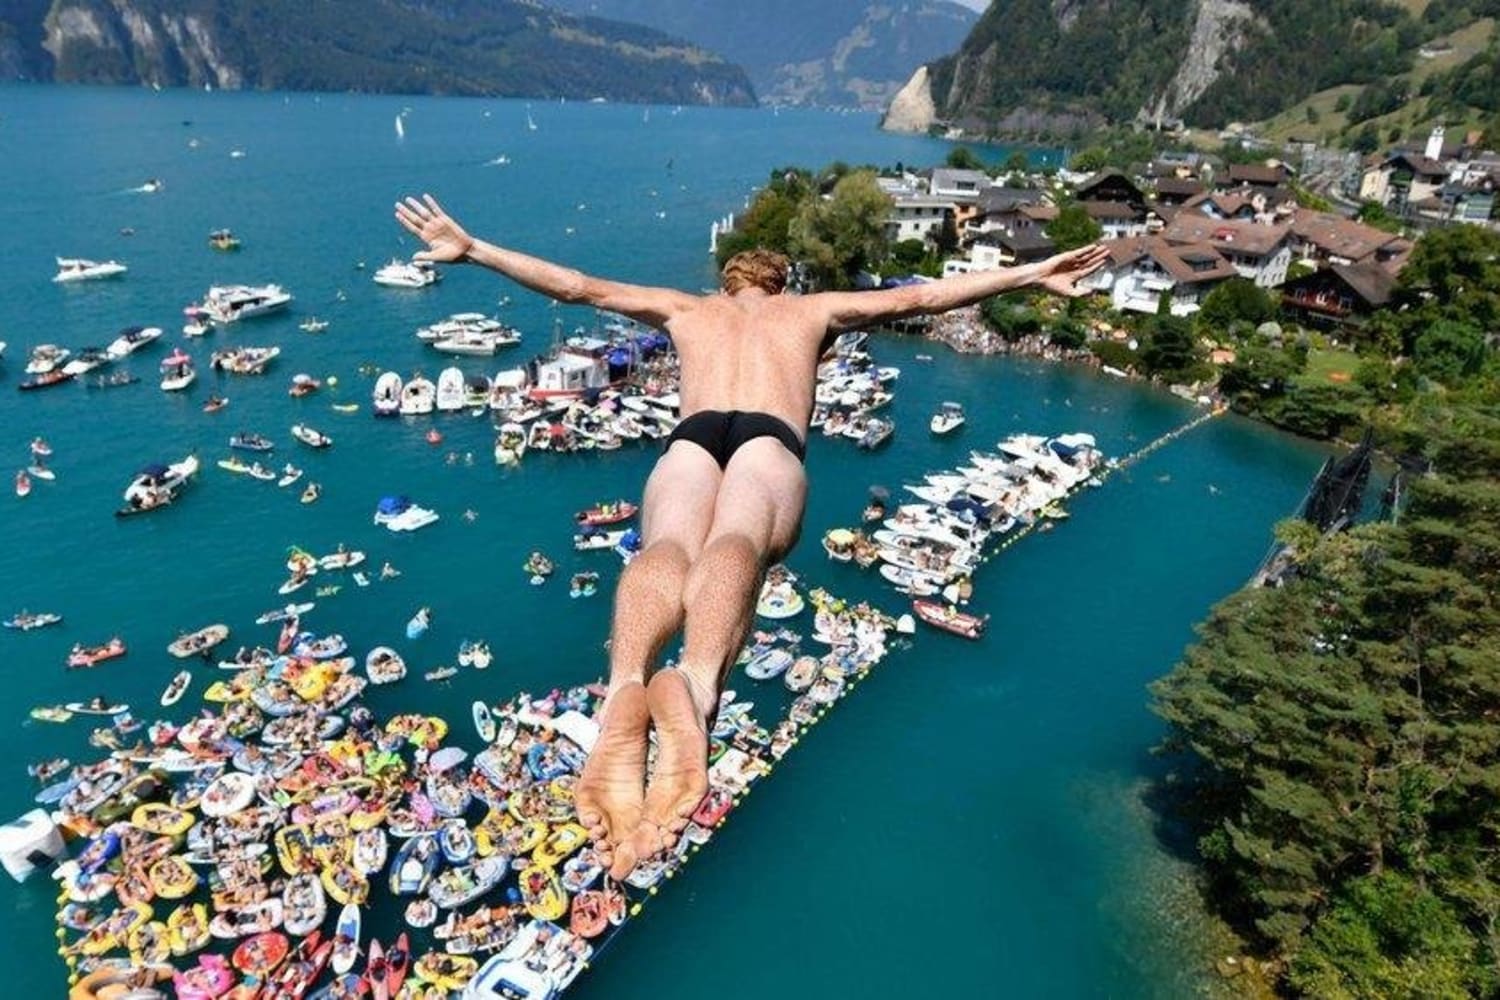 10 YEARS OF RED BULL CLIFF DIVING IN NUMBERS